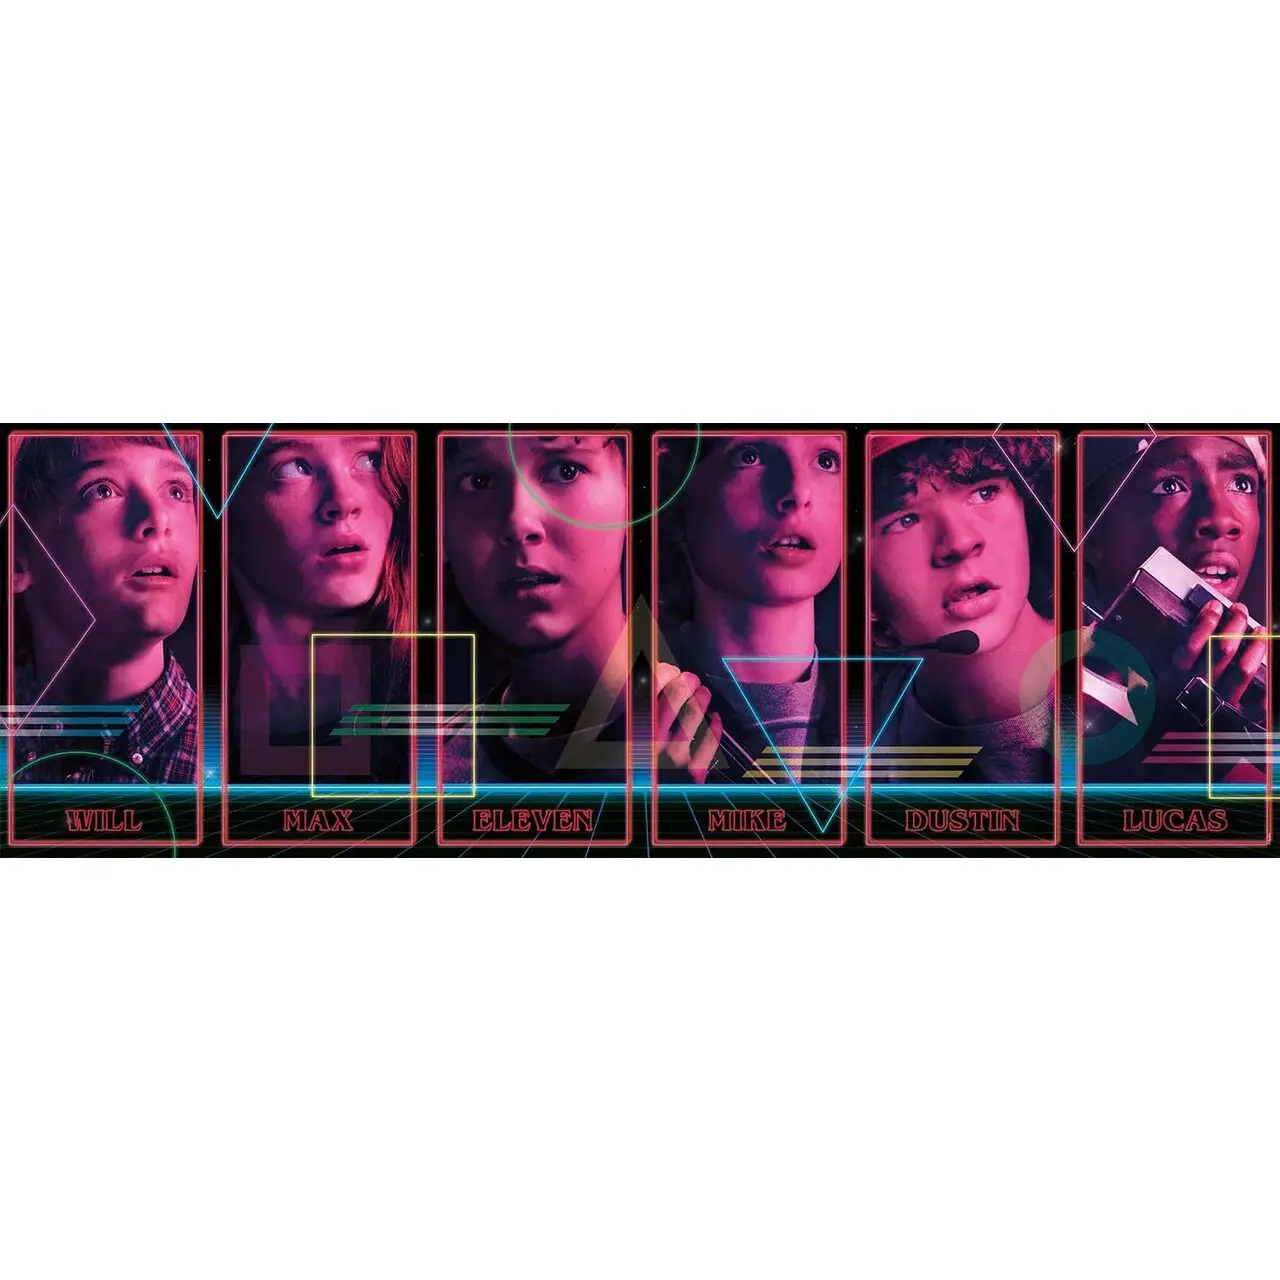 Stranger Things 1000 Puzzle Teile